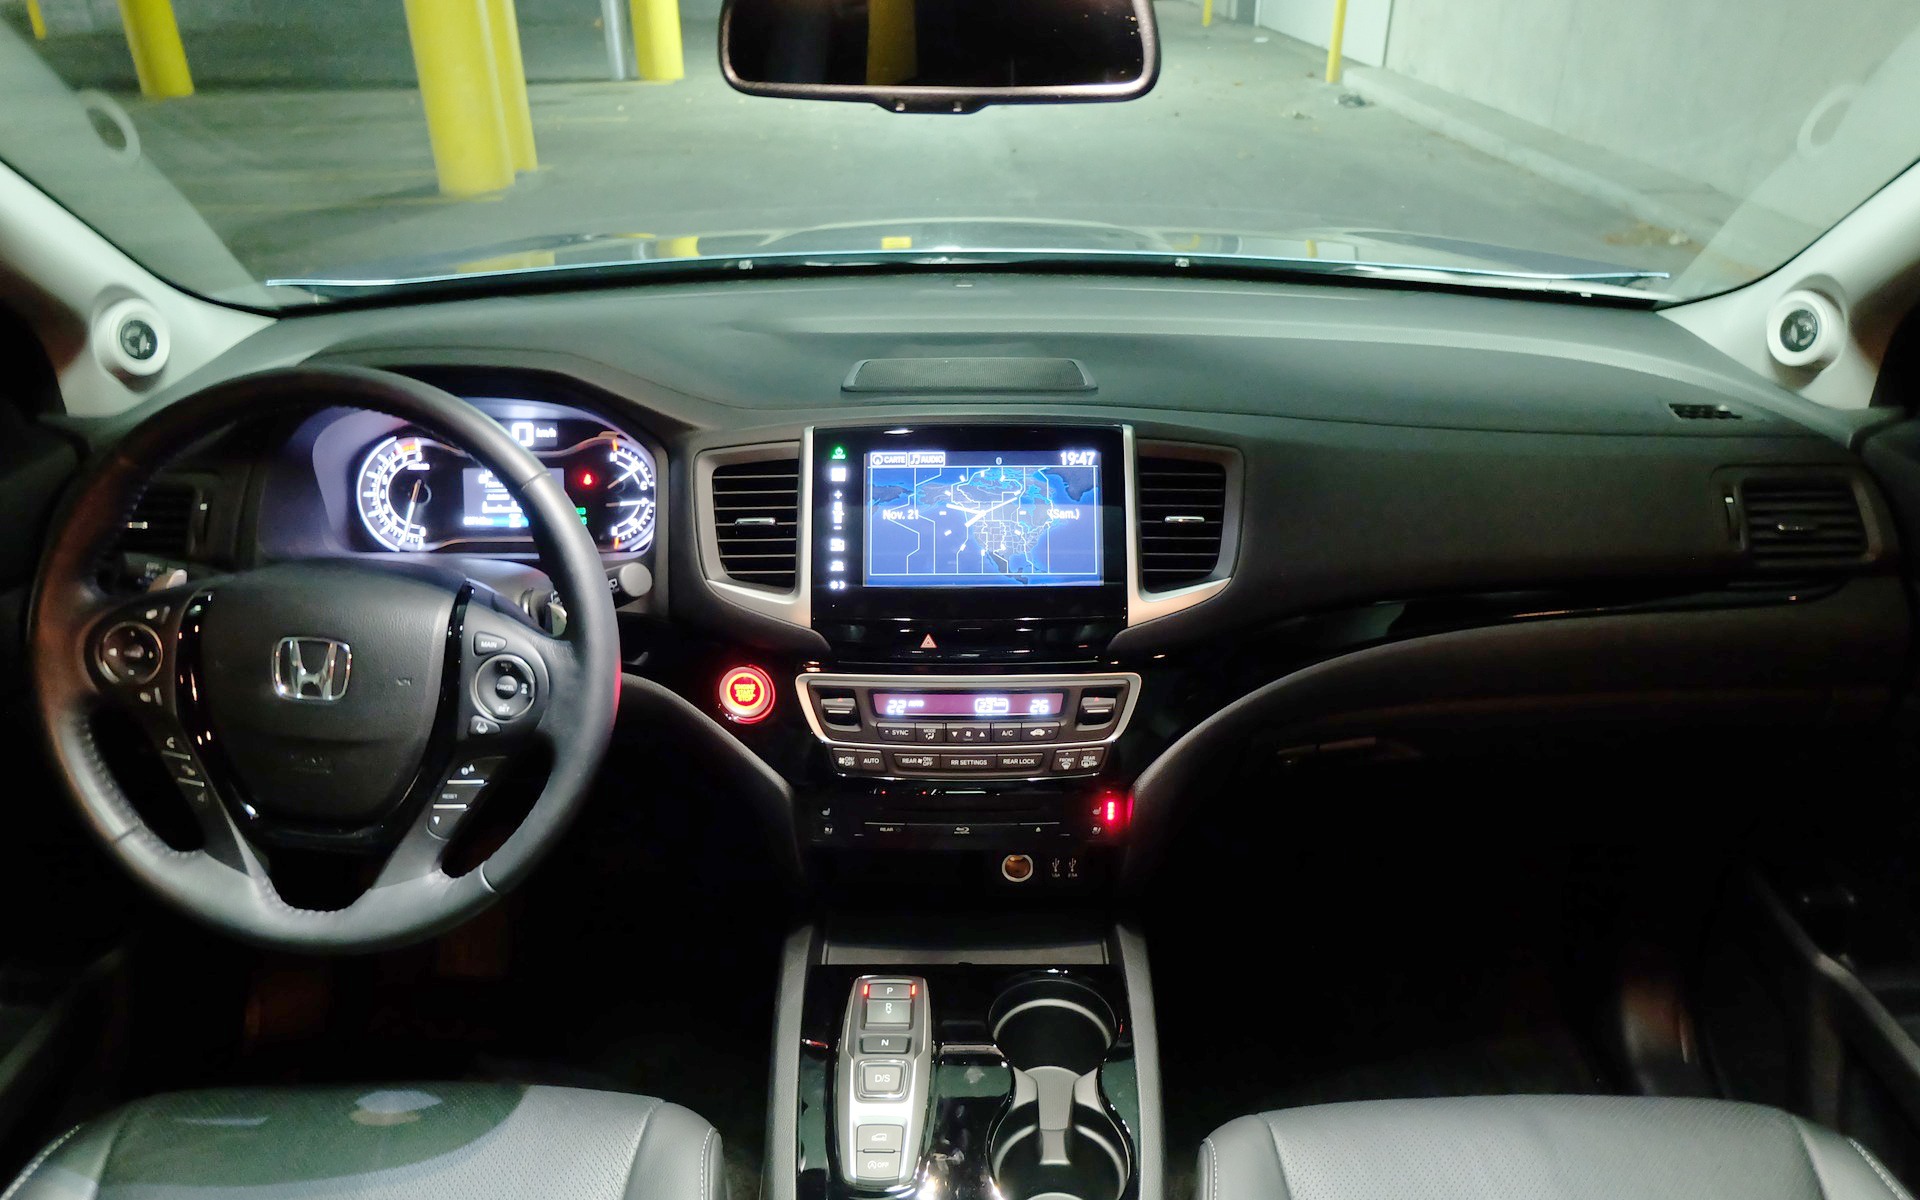 If you've been in a Honda recently, this interior will look familiar.